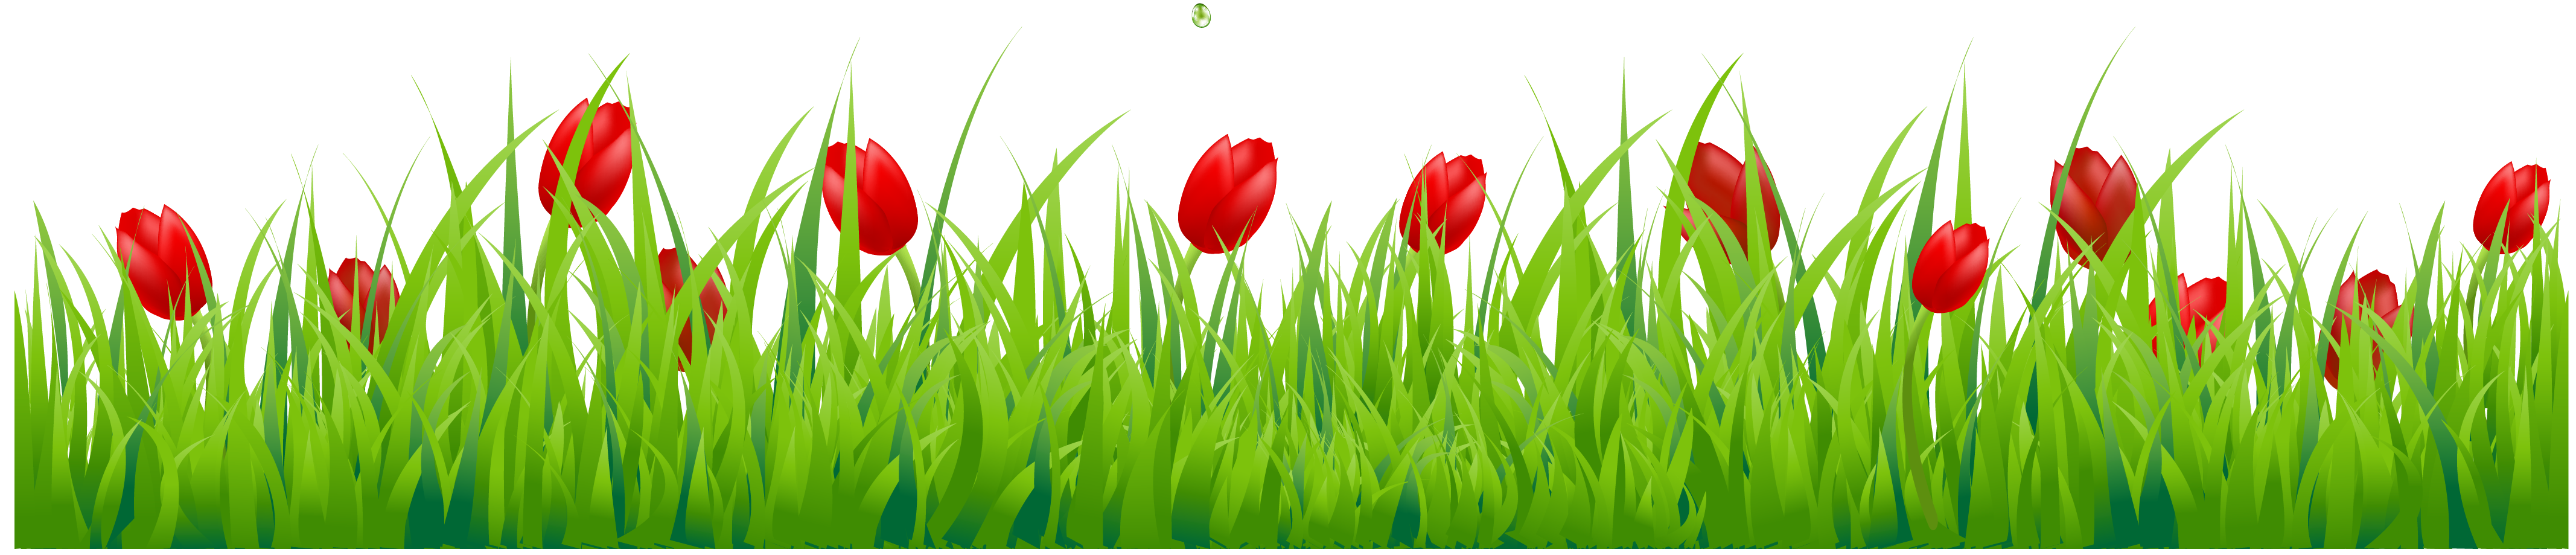 Easter Grass Flowers PNG Transparent Image